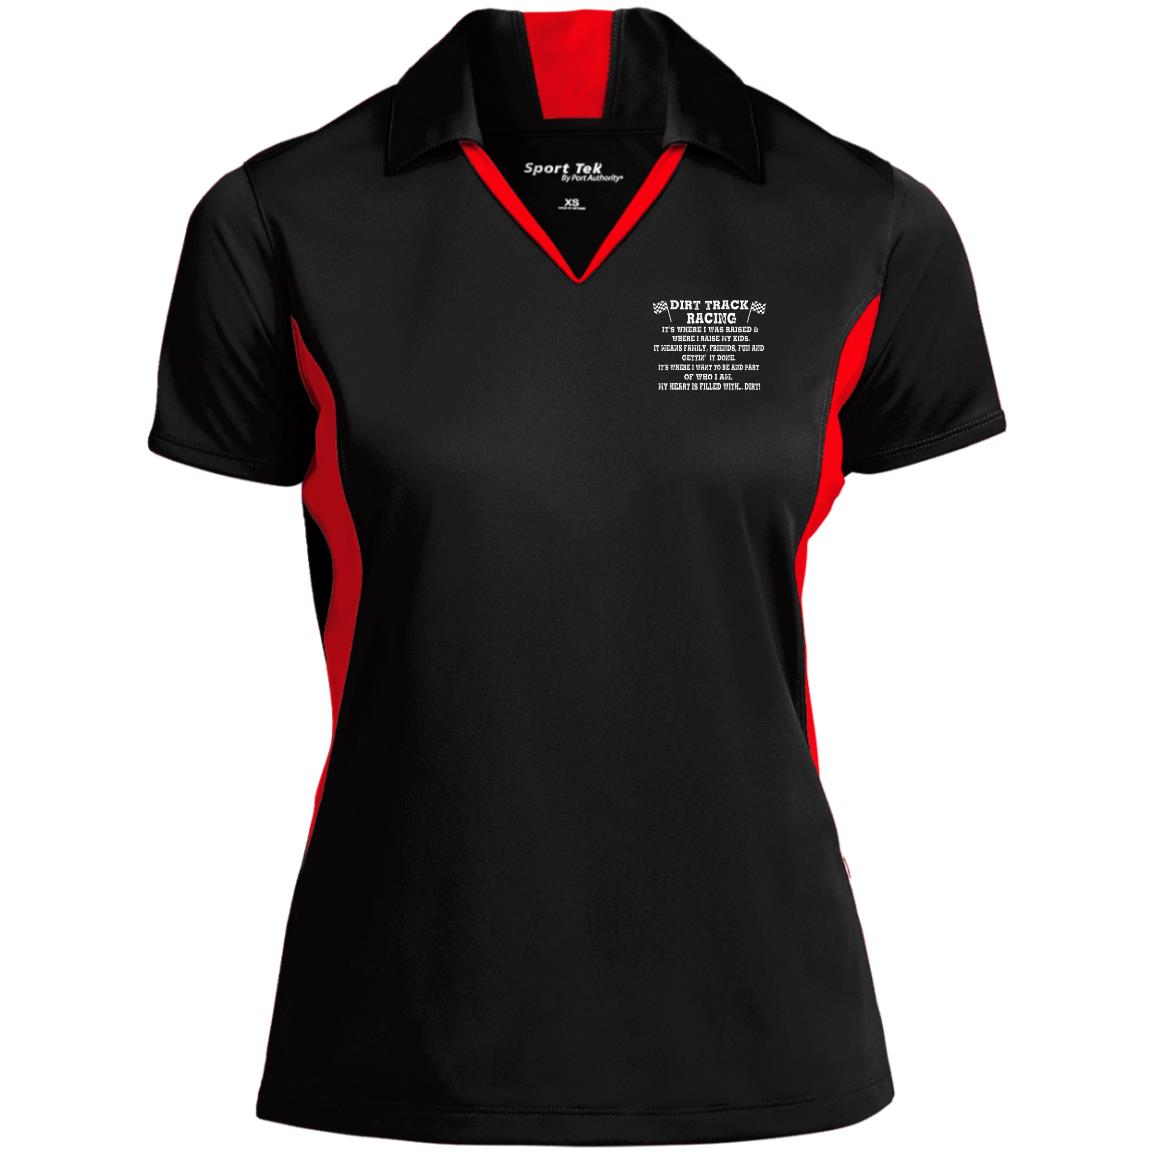 Dirt Track Racing It's Where I Was Raised Ladies' Colorblock Performance Polo